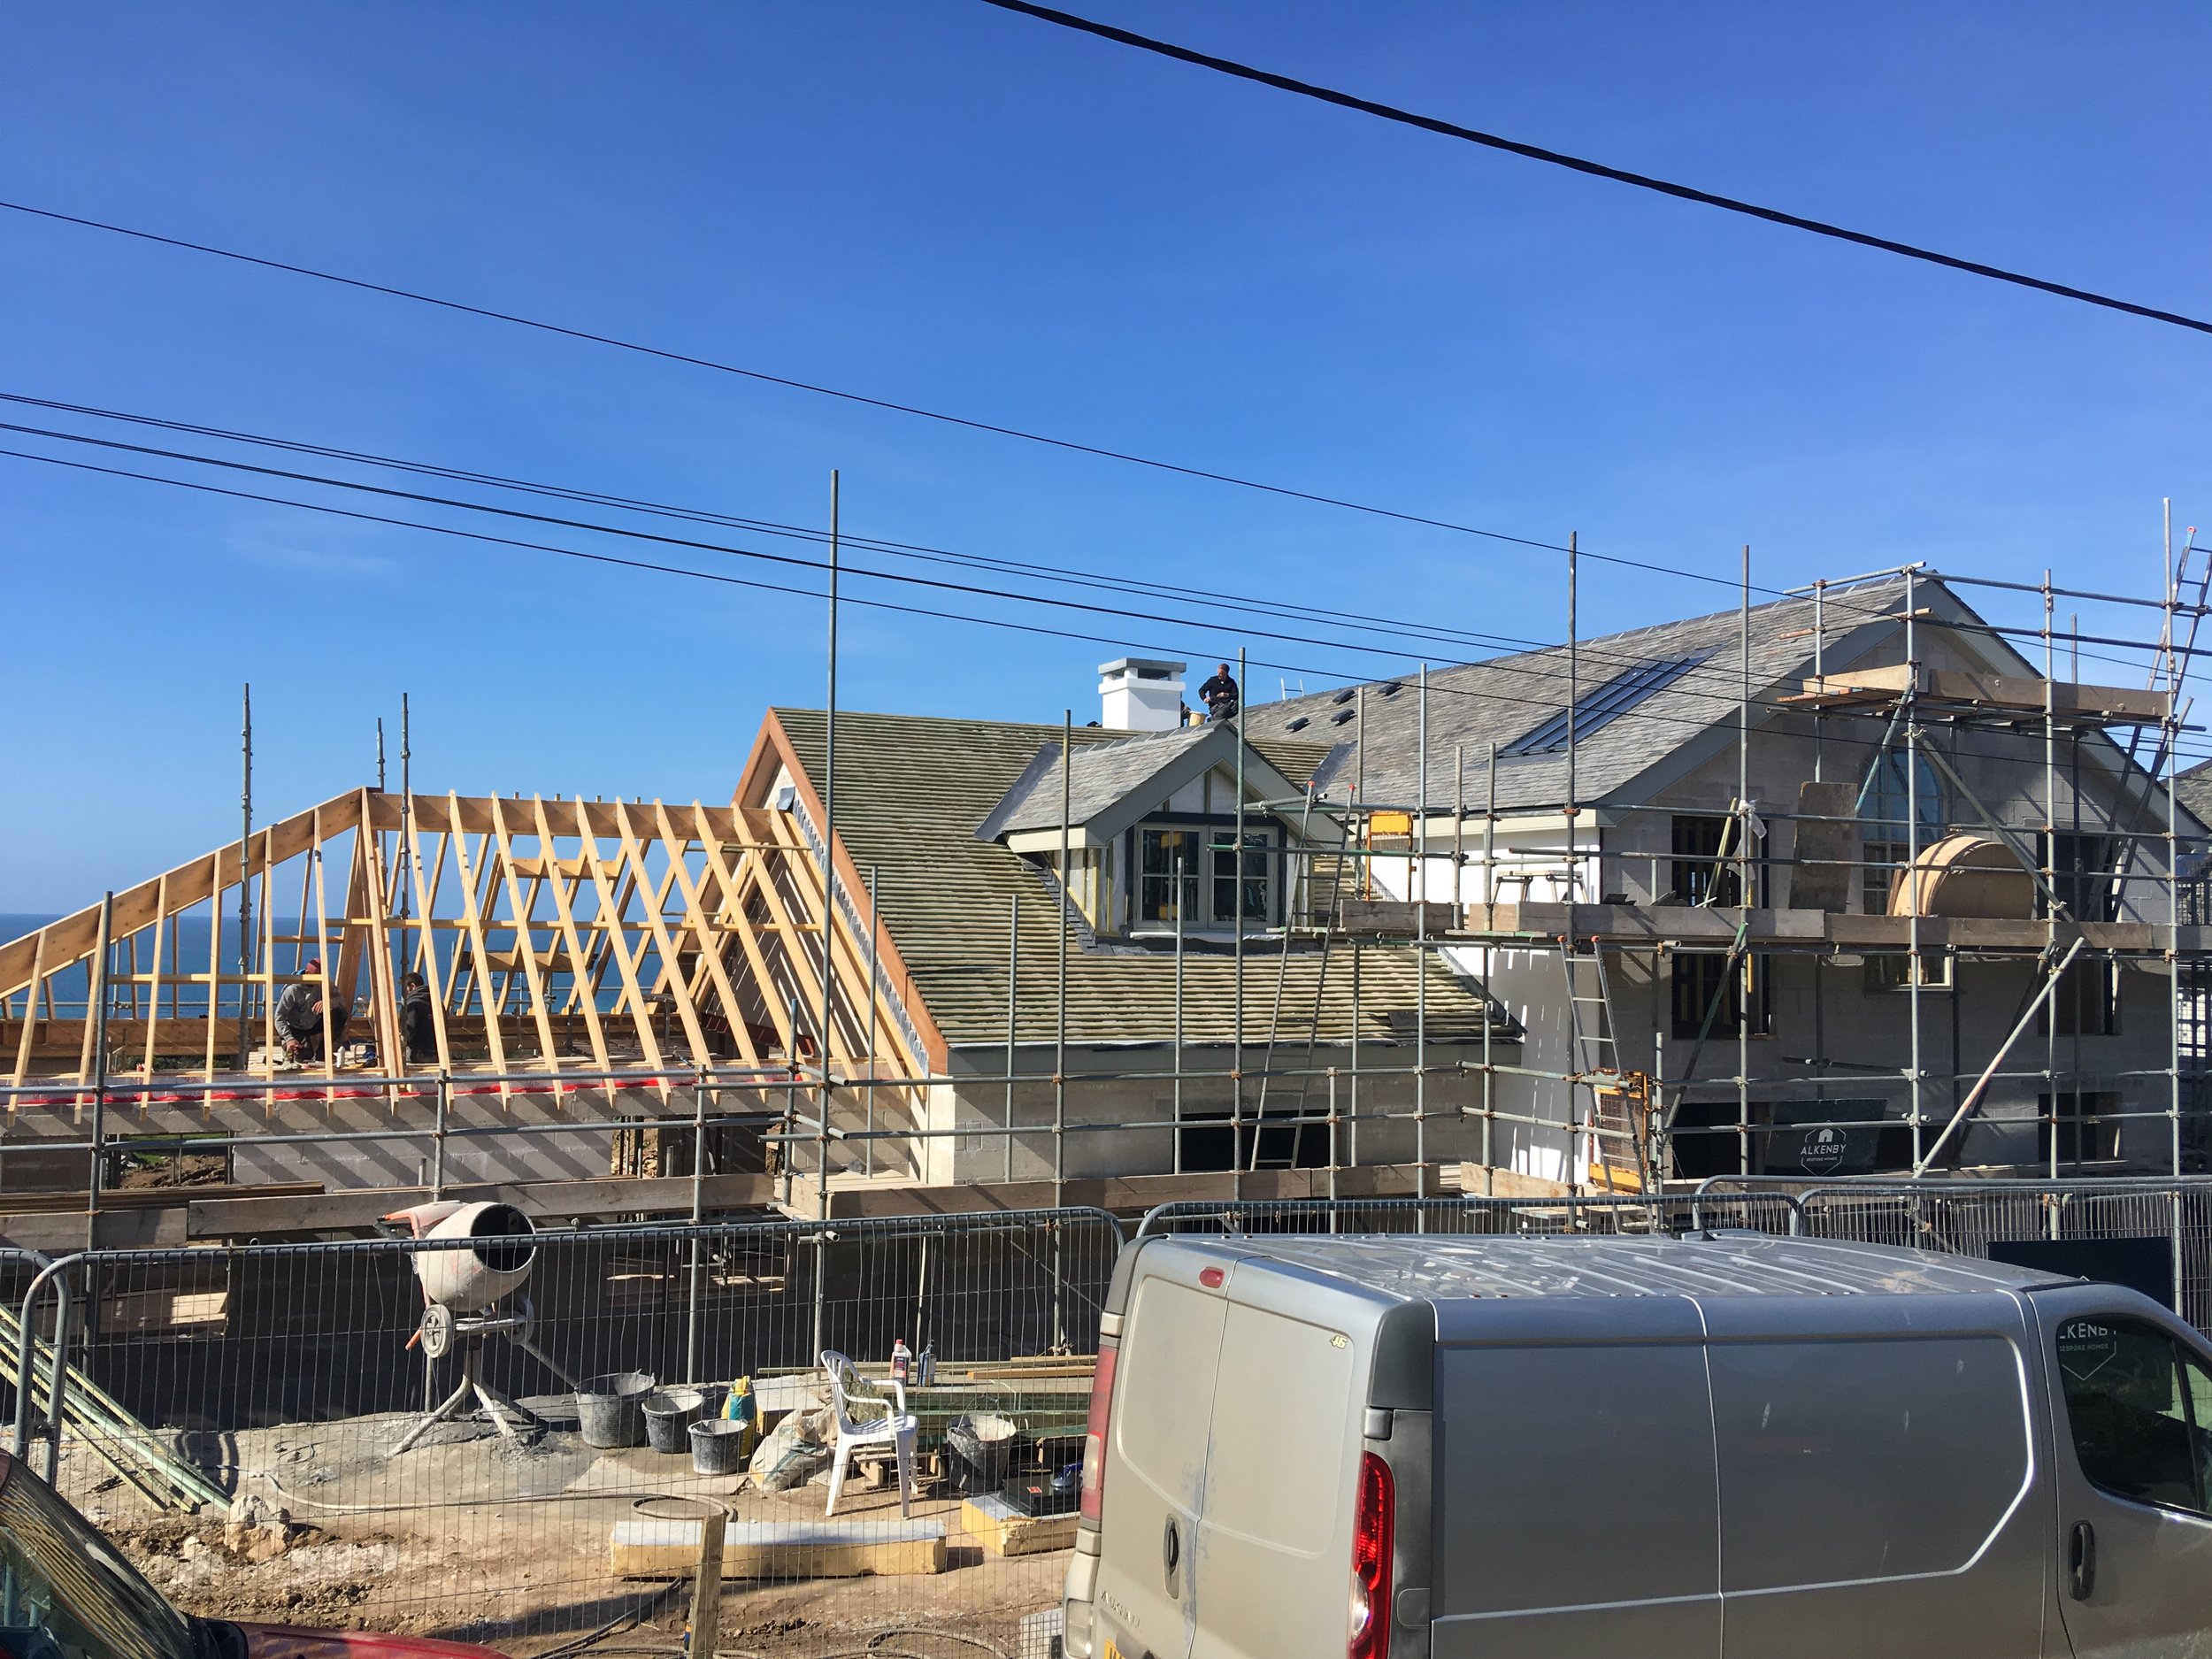 Truss and Tie arrives, final roof going up (March 23rd 2019)